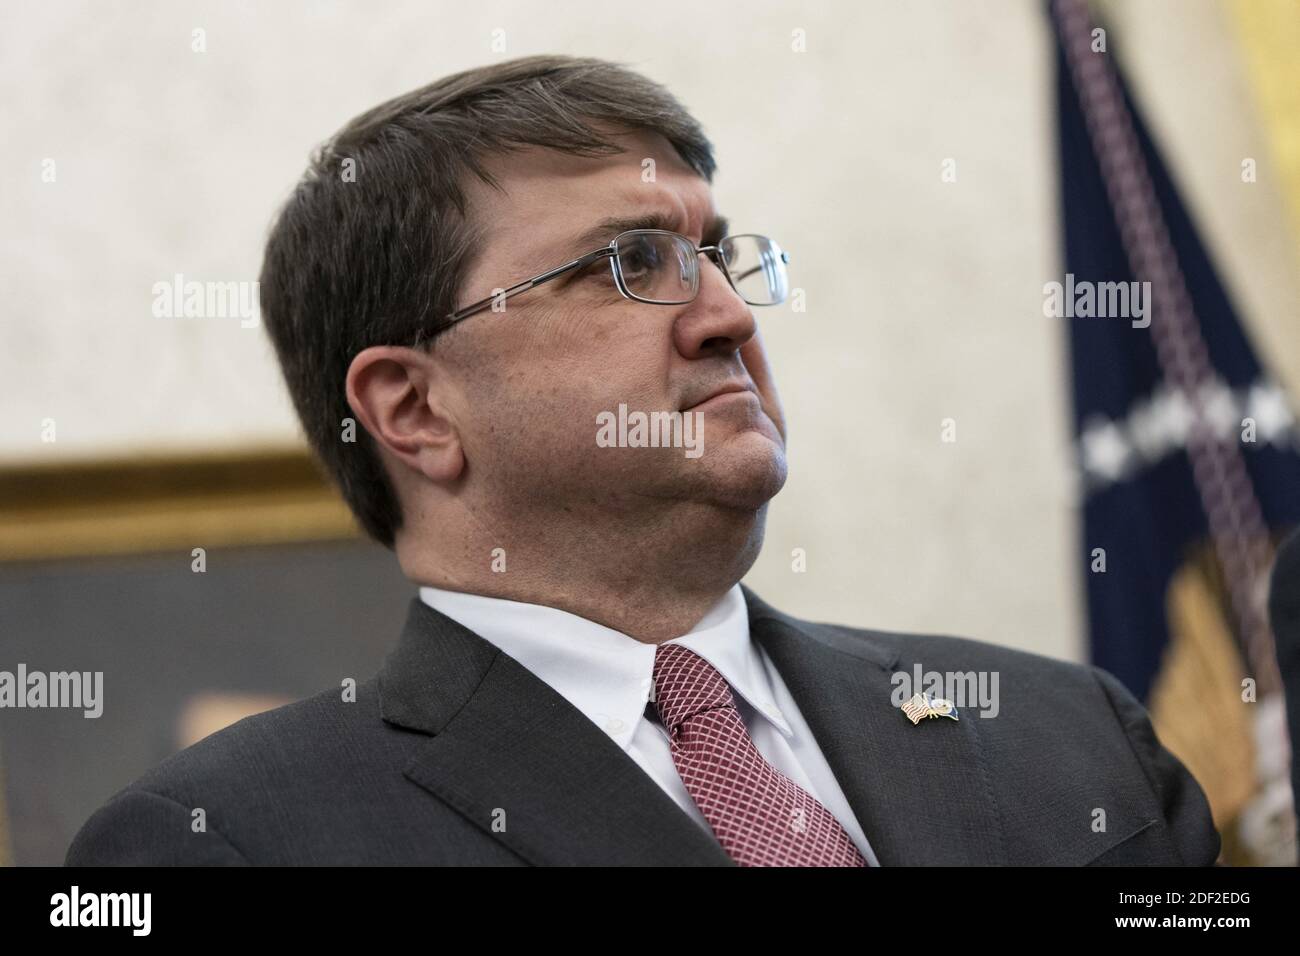 United States Secretary of Veterans Affairs (VA) Robert Wilkie attends a signing ceremony for S. 153, The Supporting Veterans in STEM Careers Act at the White House in Washington, DC, USA on February 11, 2020. Photo by Chris Kleponis/Pool via CNP/ABACAPRESS.COM Stock Photo